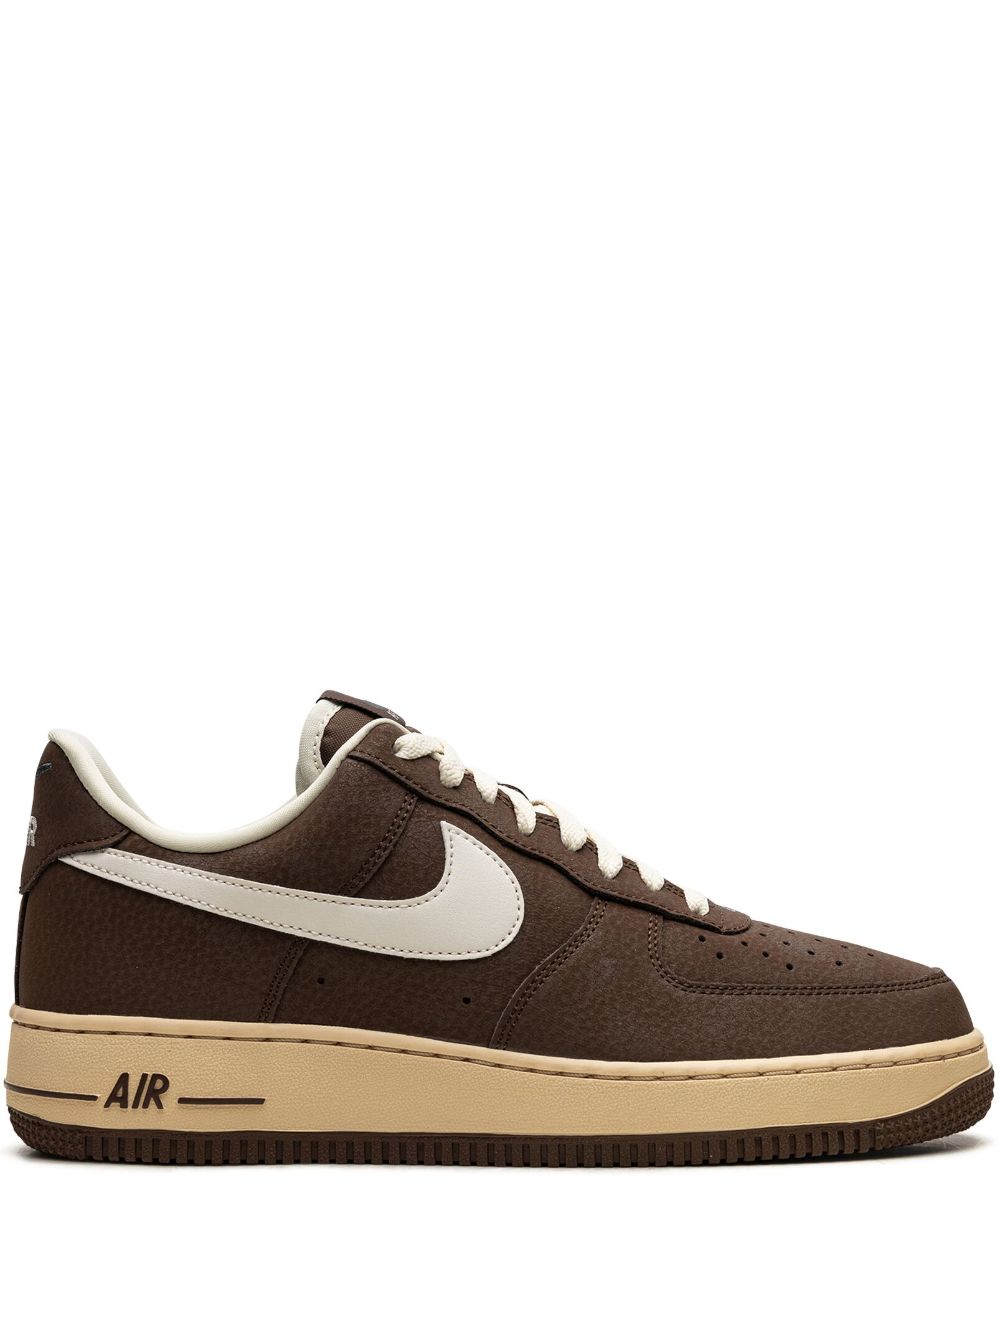 Nike Air Force 1 '07 Cacao Wow Sneakers - Braun von Nike